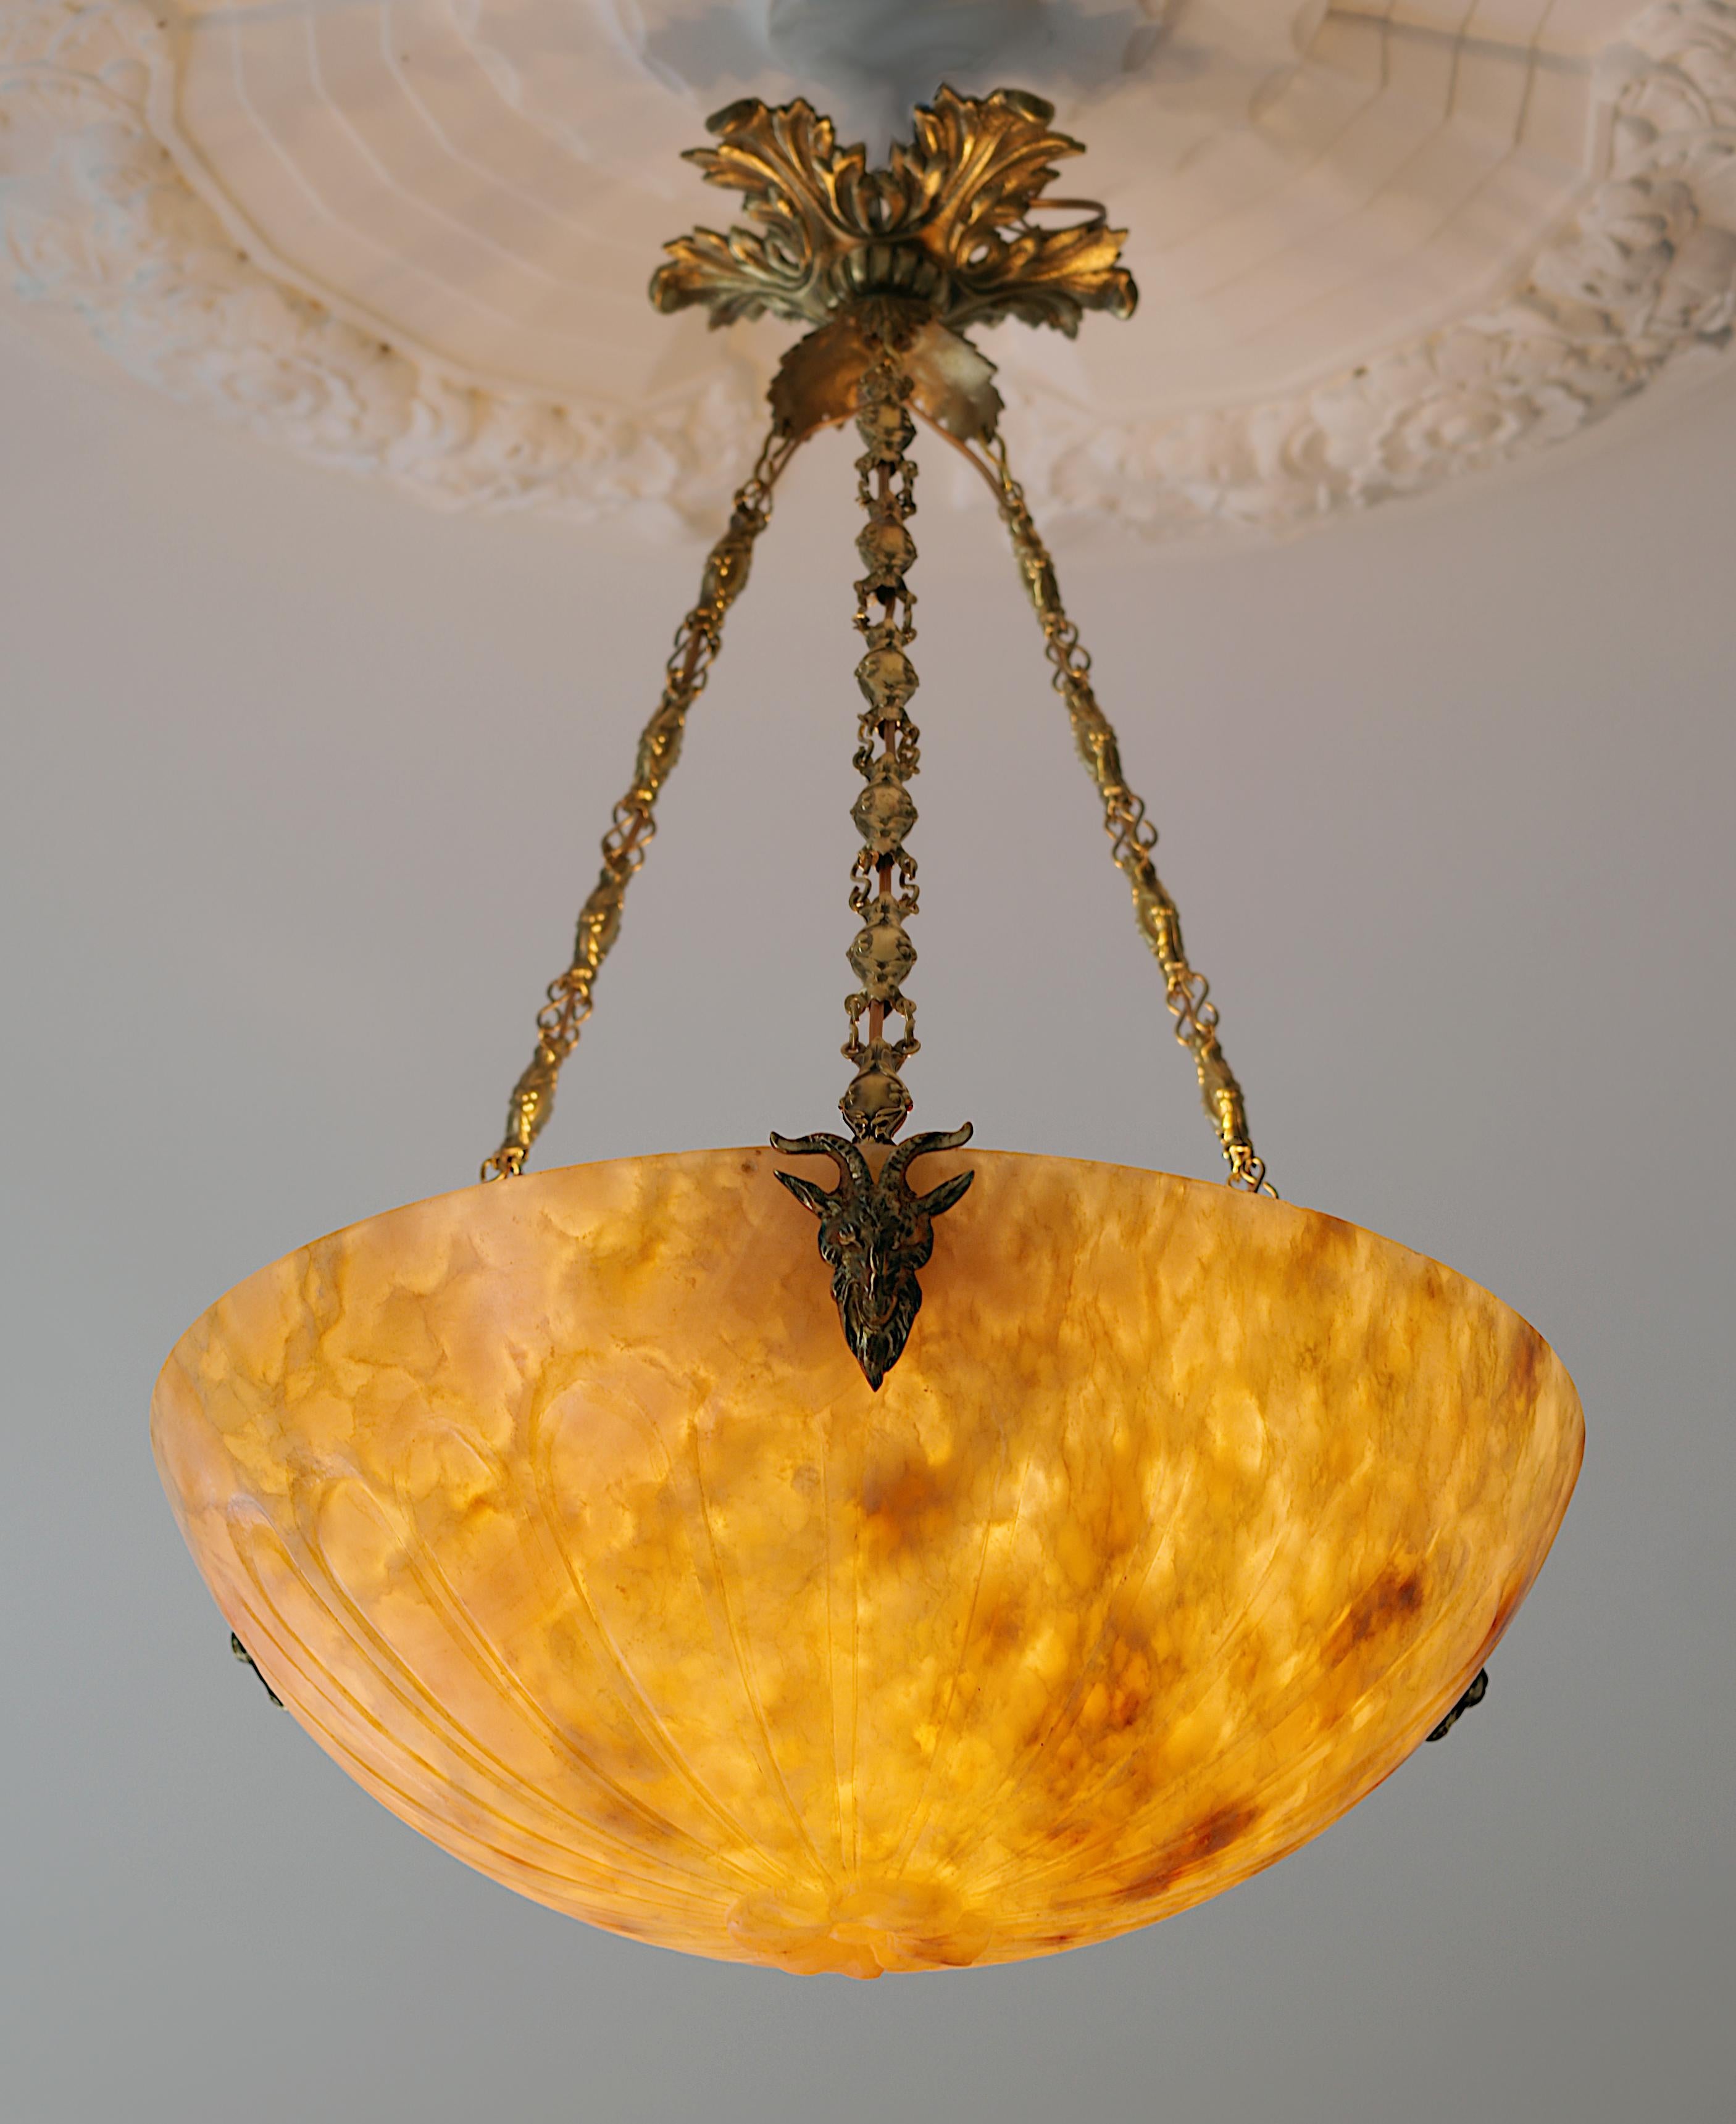 French Art Deco alabaster pendant chandelier, France, 1920s. Carved alabaster shade. Bronze (canopy and hidden-holes) and brass (chains) fixture. Goat's head hidden-holes. Old alabaster cannot be compared to new ones. Old alabaster has veins.